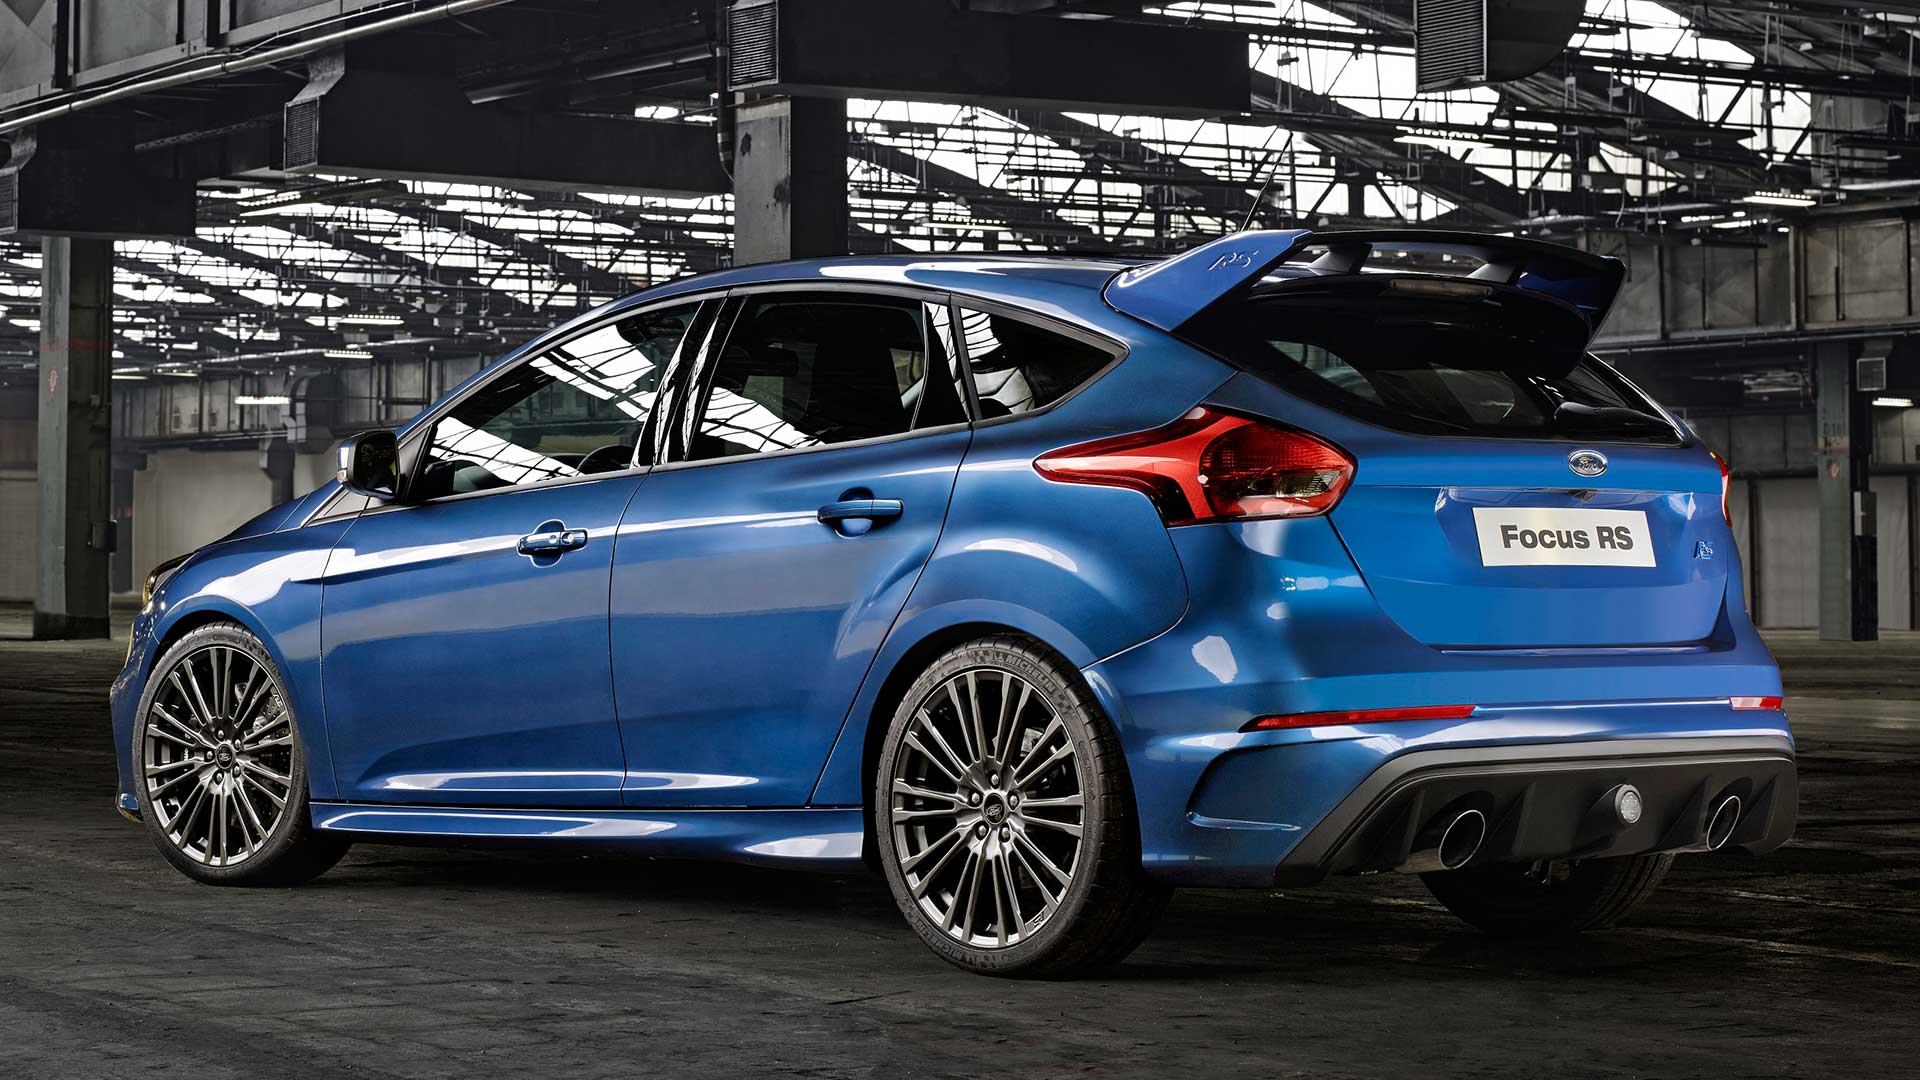 Rear 2015 Ford Focus RS Images cute Wallpapers